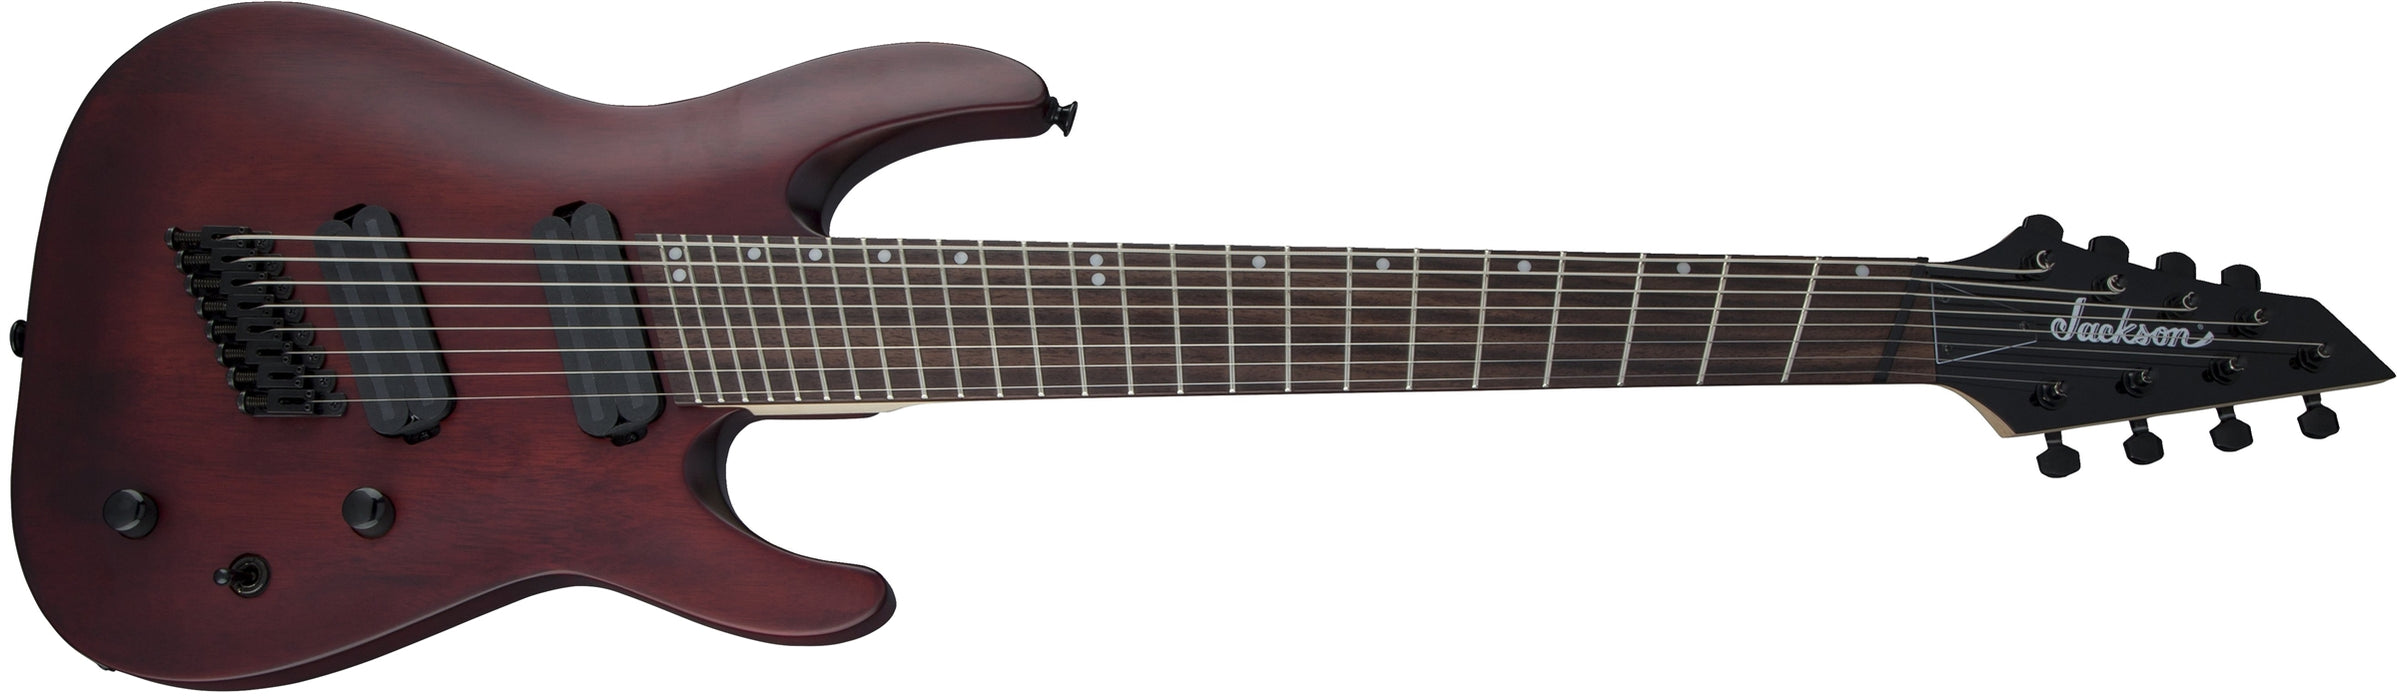 Jackson X Series Dinky Arch Top DKAF8 MS, Laurel Fingerboard, Multi-Scale, Stained Mahogany